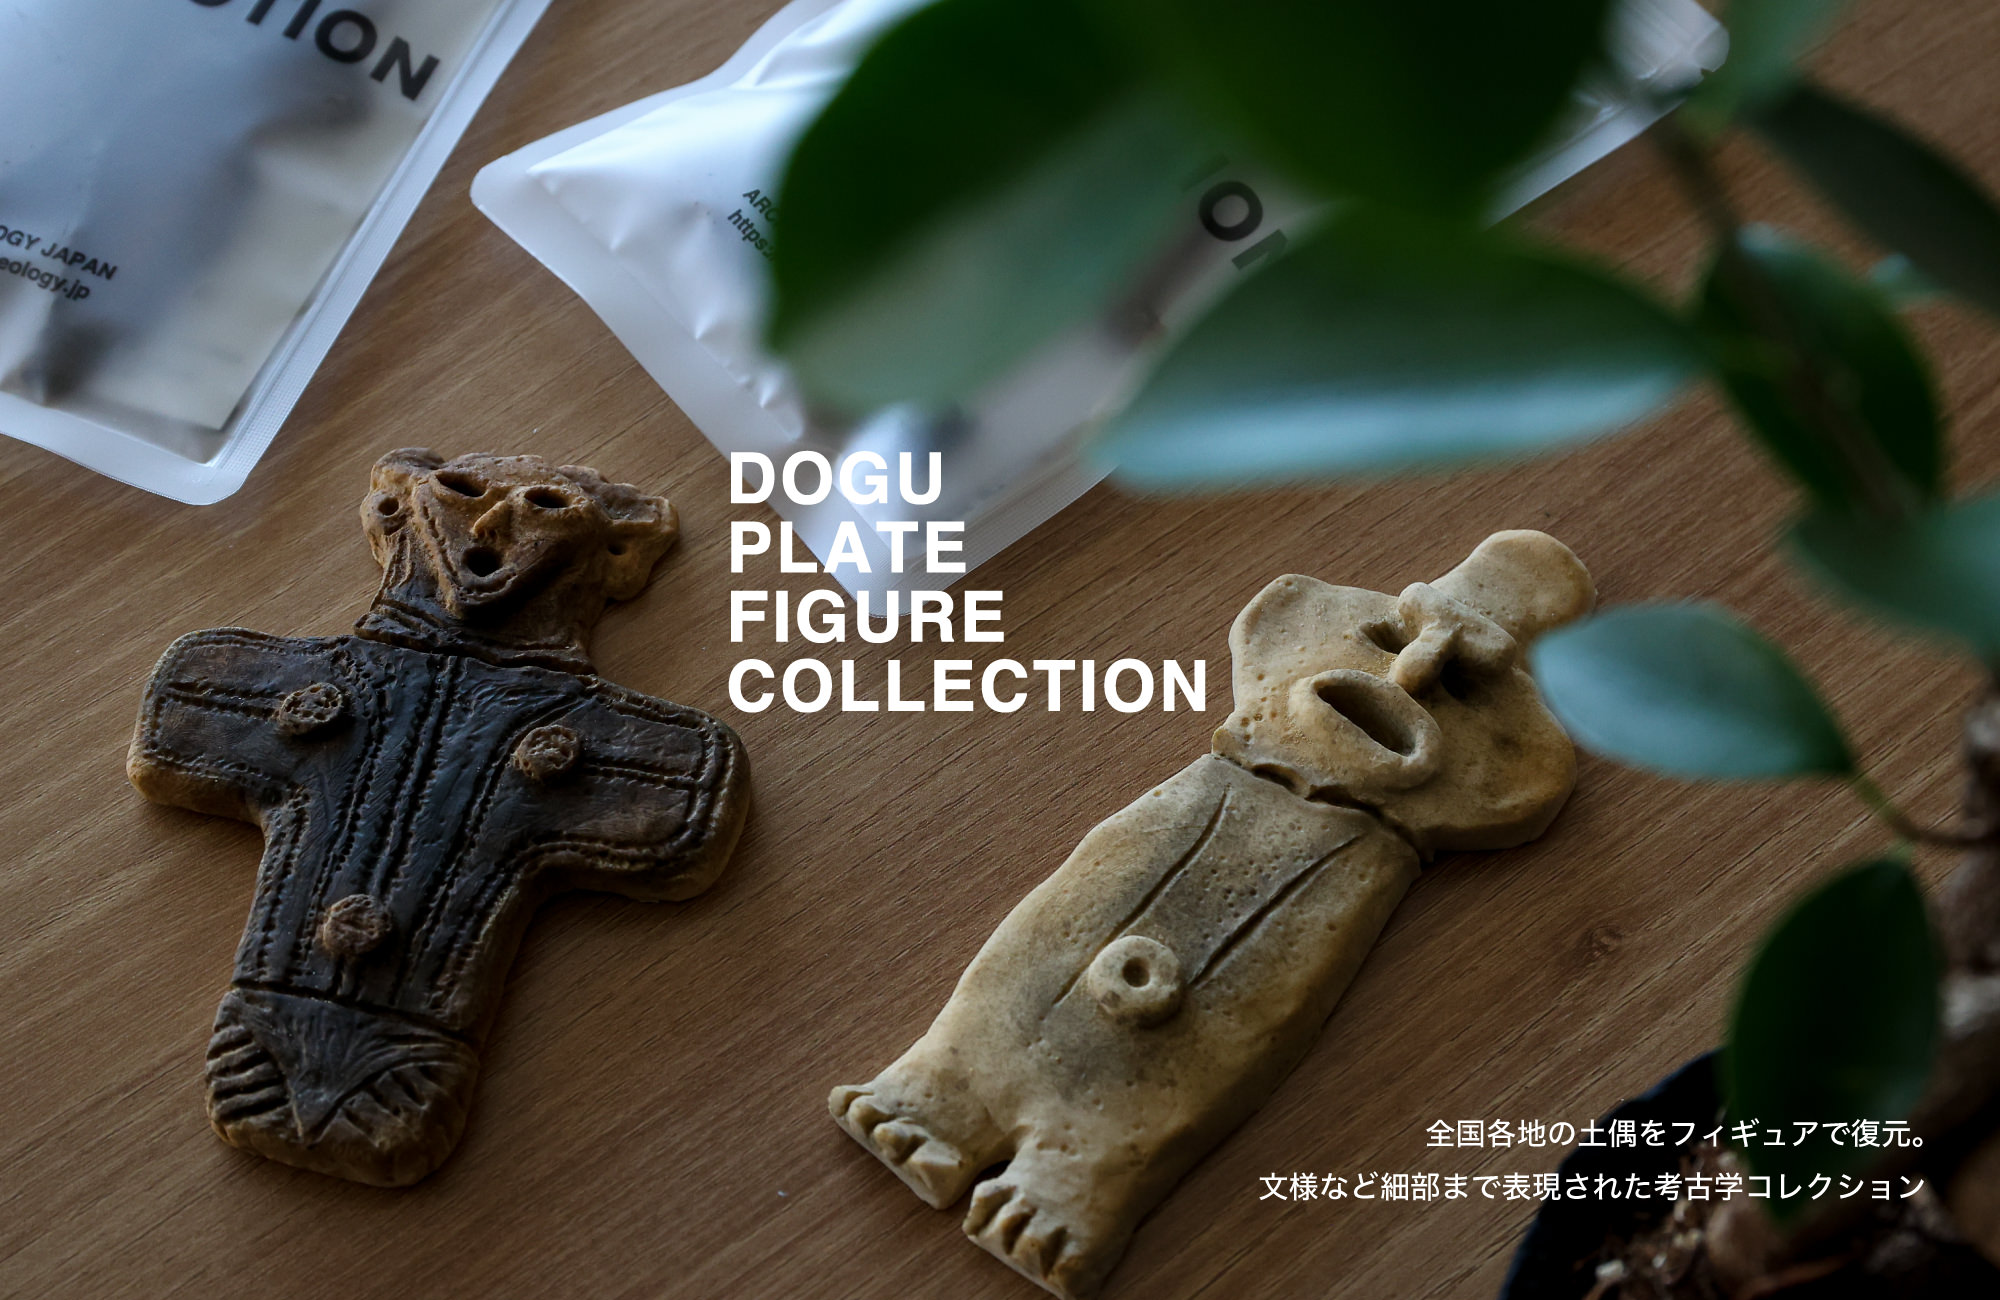 DOGU PLATE FIGURE COLLECTION